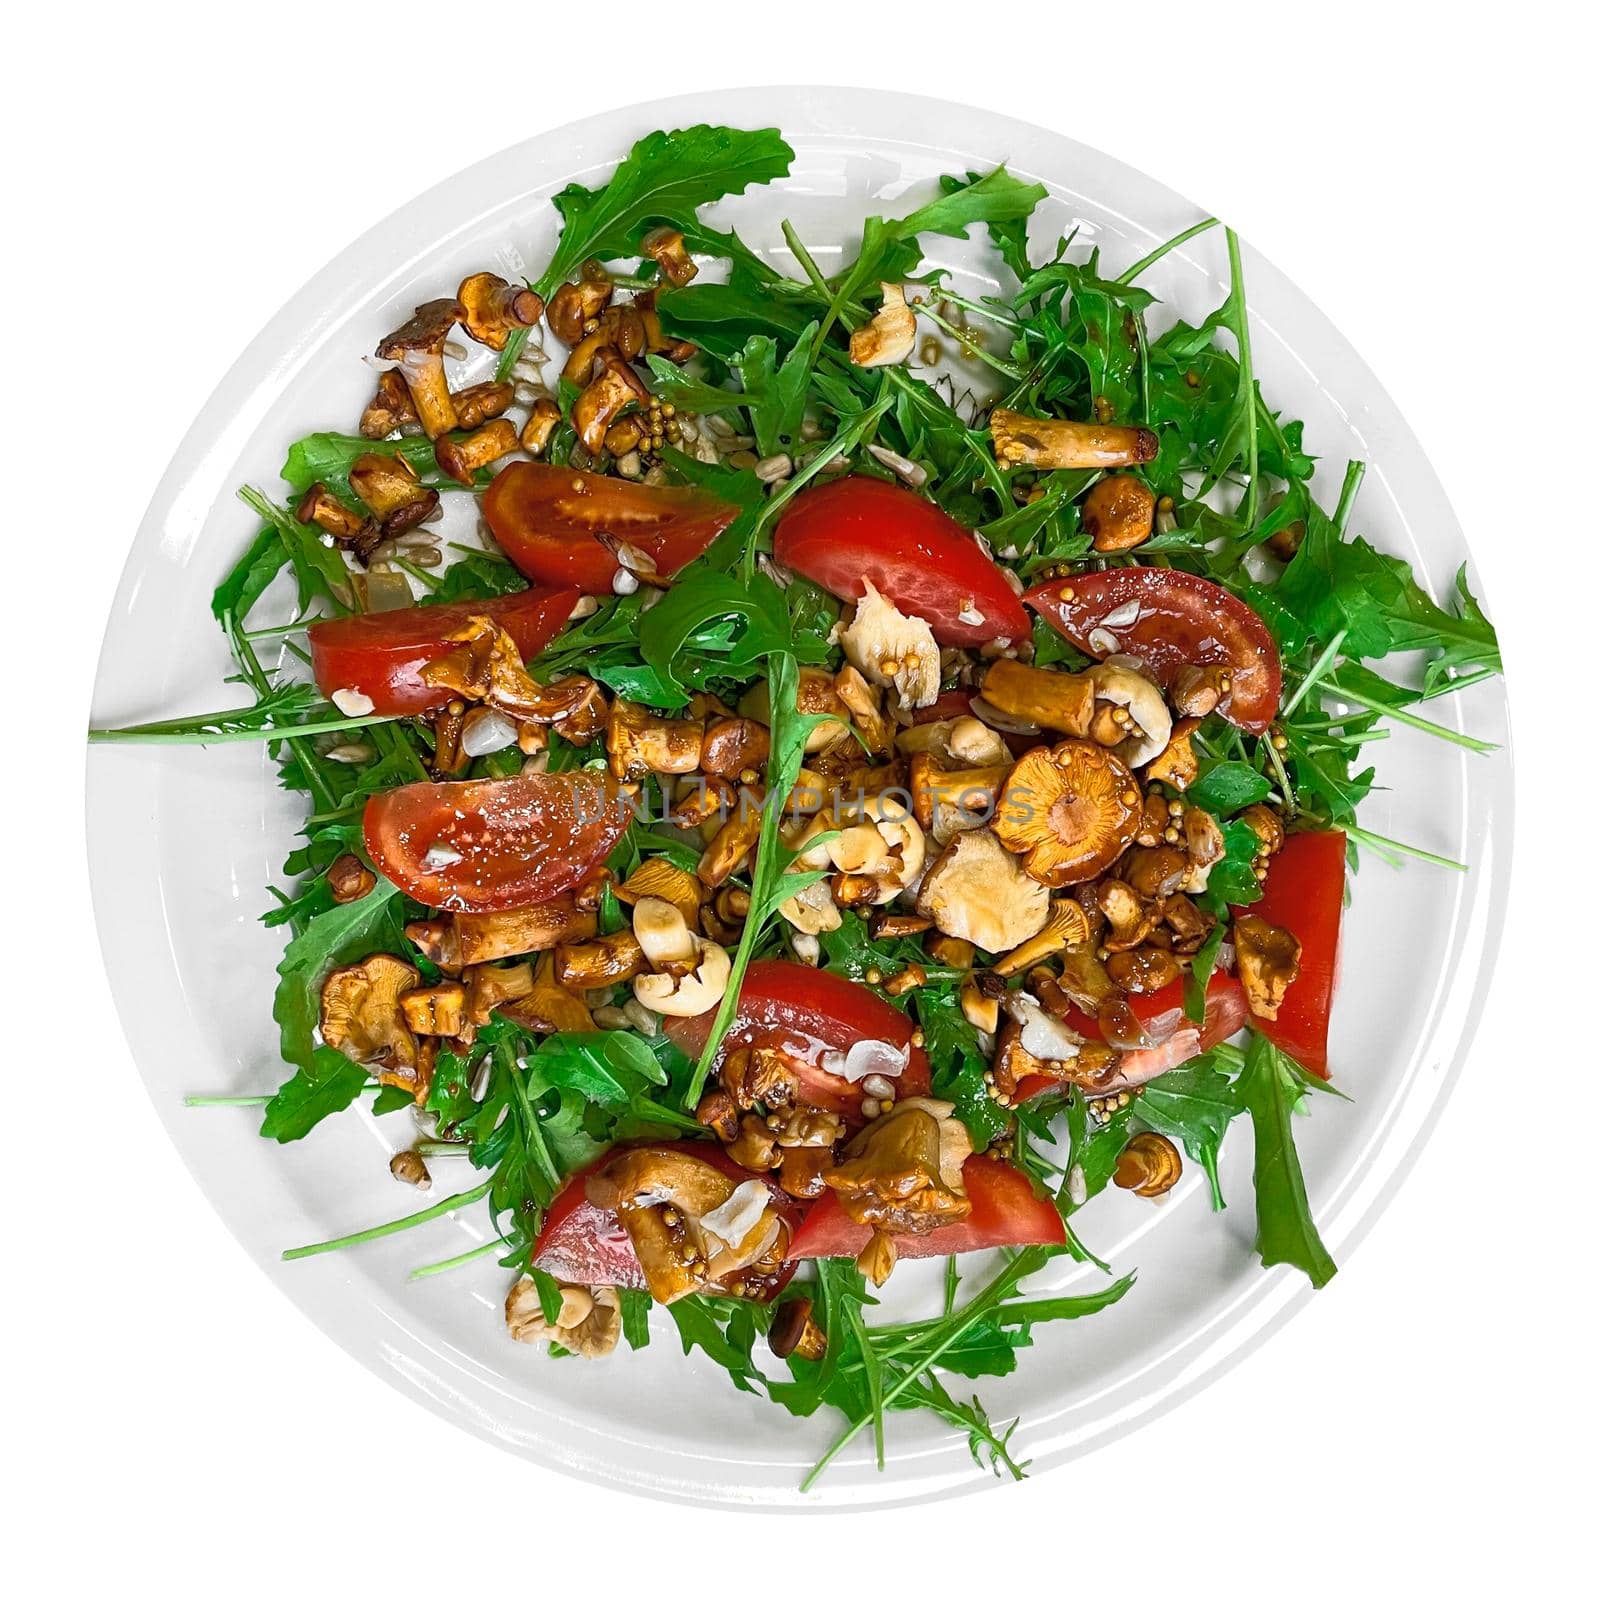 Salad with arugula and chanterelle mushrooms on plate by yganko